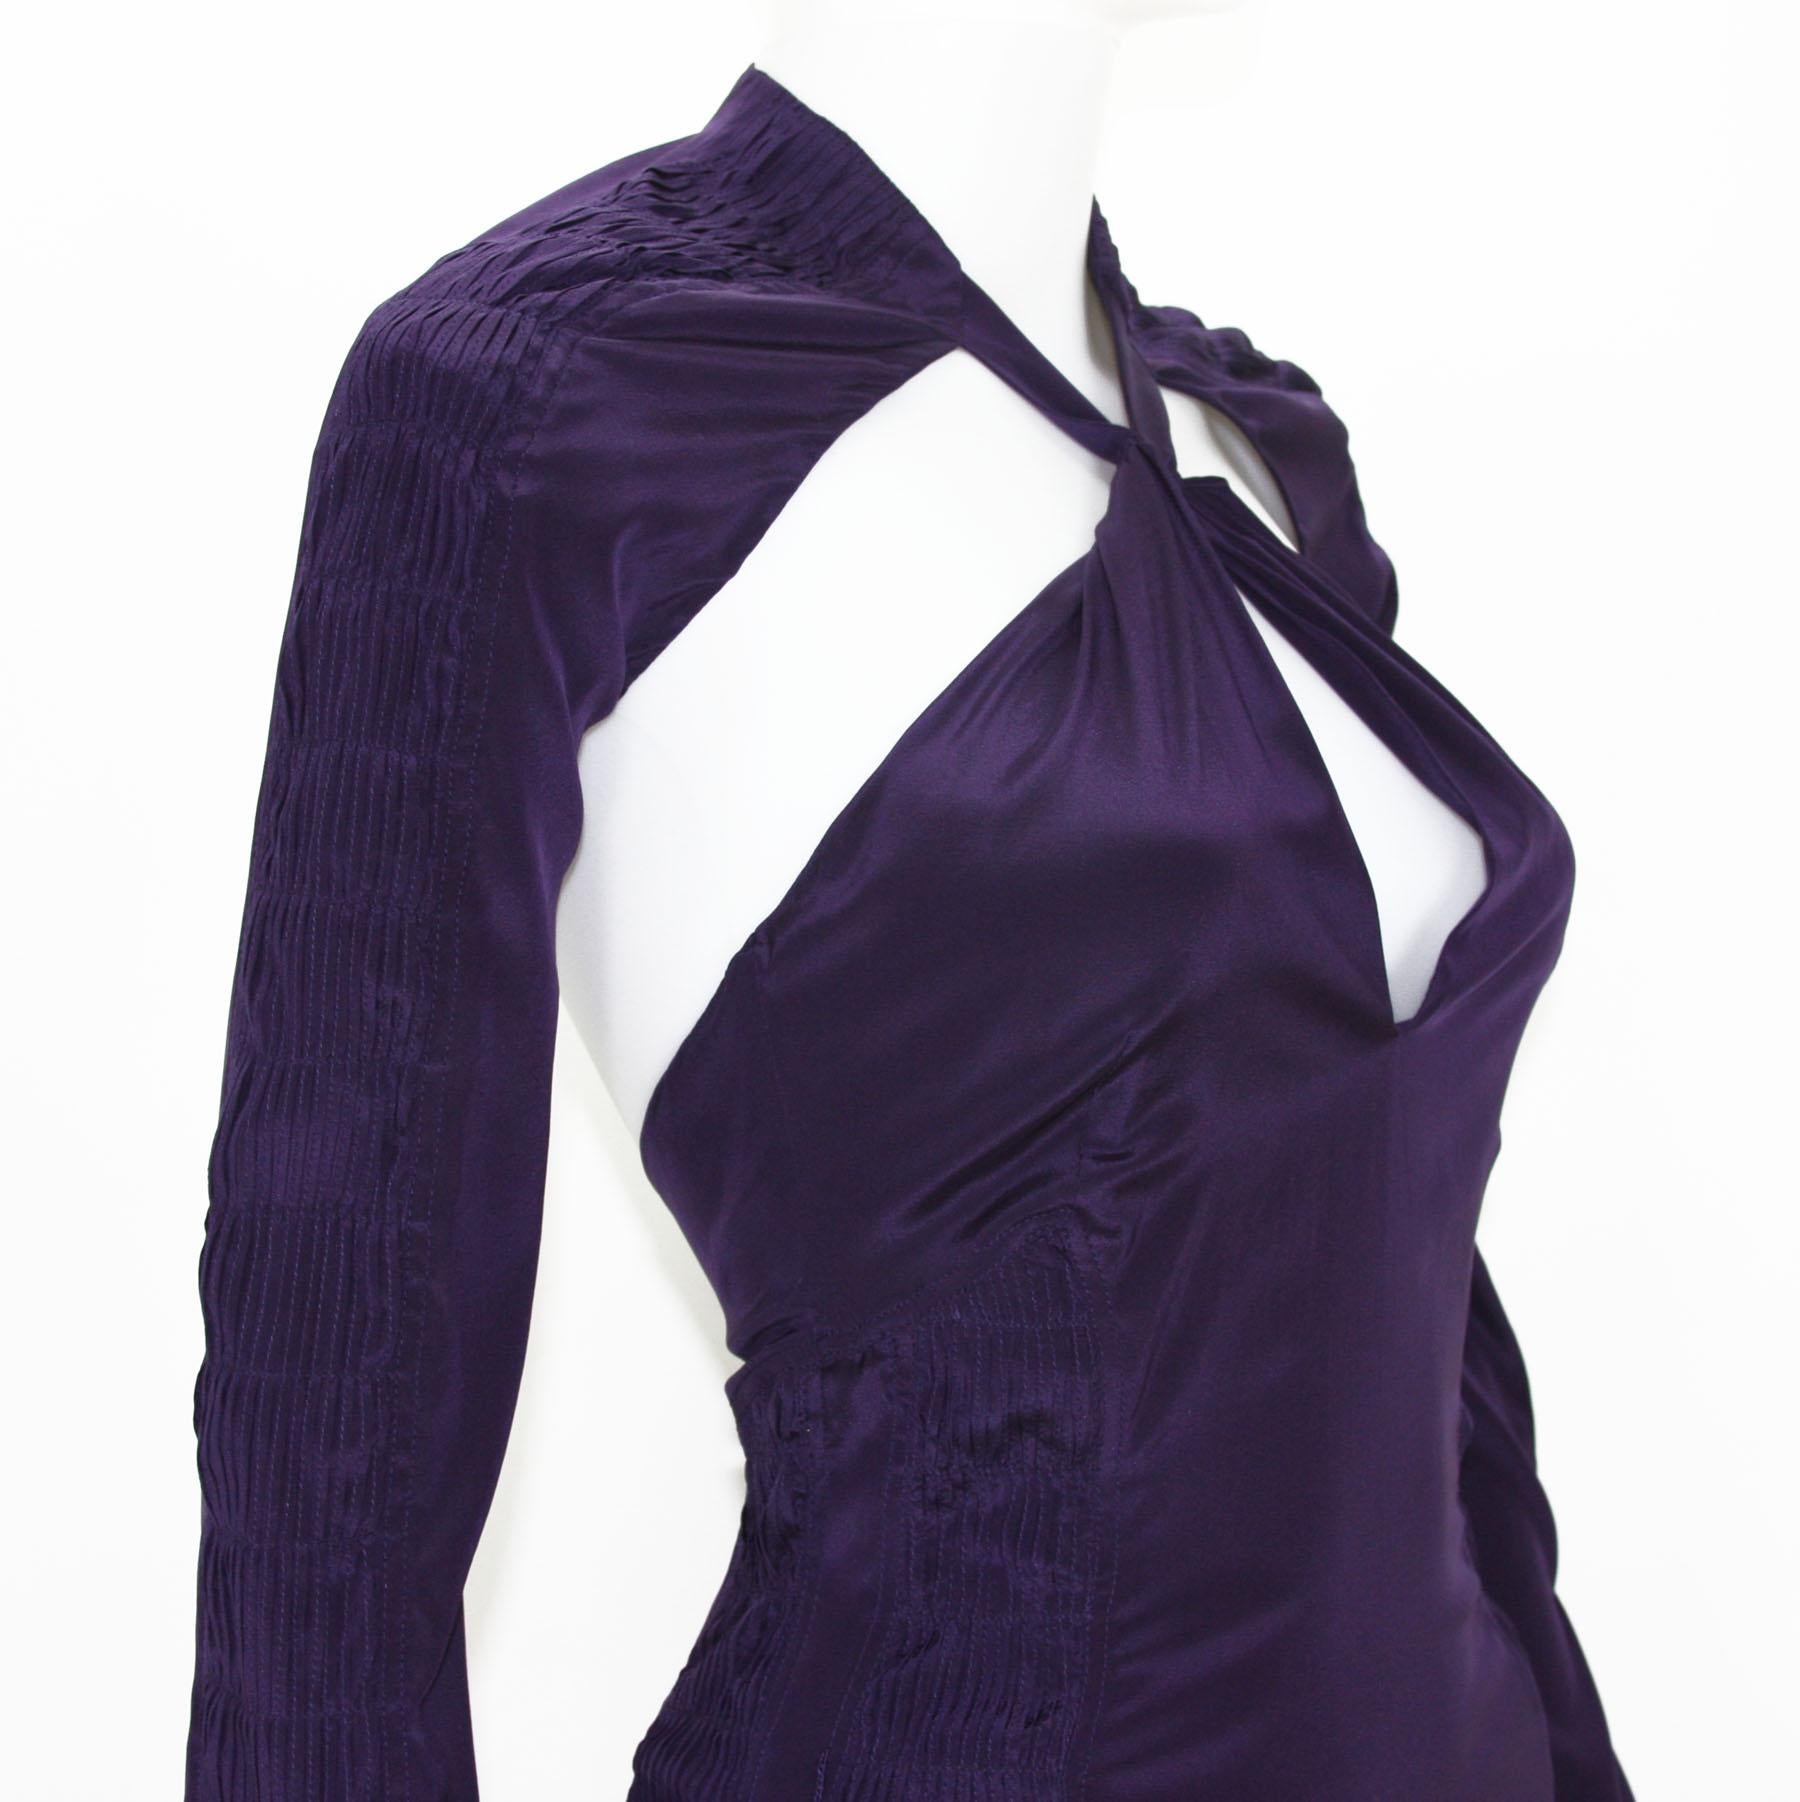 Black New Tom Ford for Gucci S/S 2004 Deep Purple Silk Plunging Backless Dress 38 & 44 For Sale